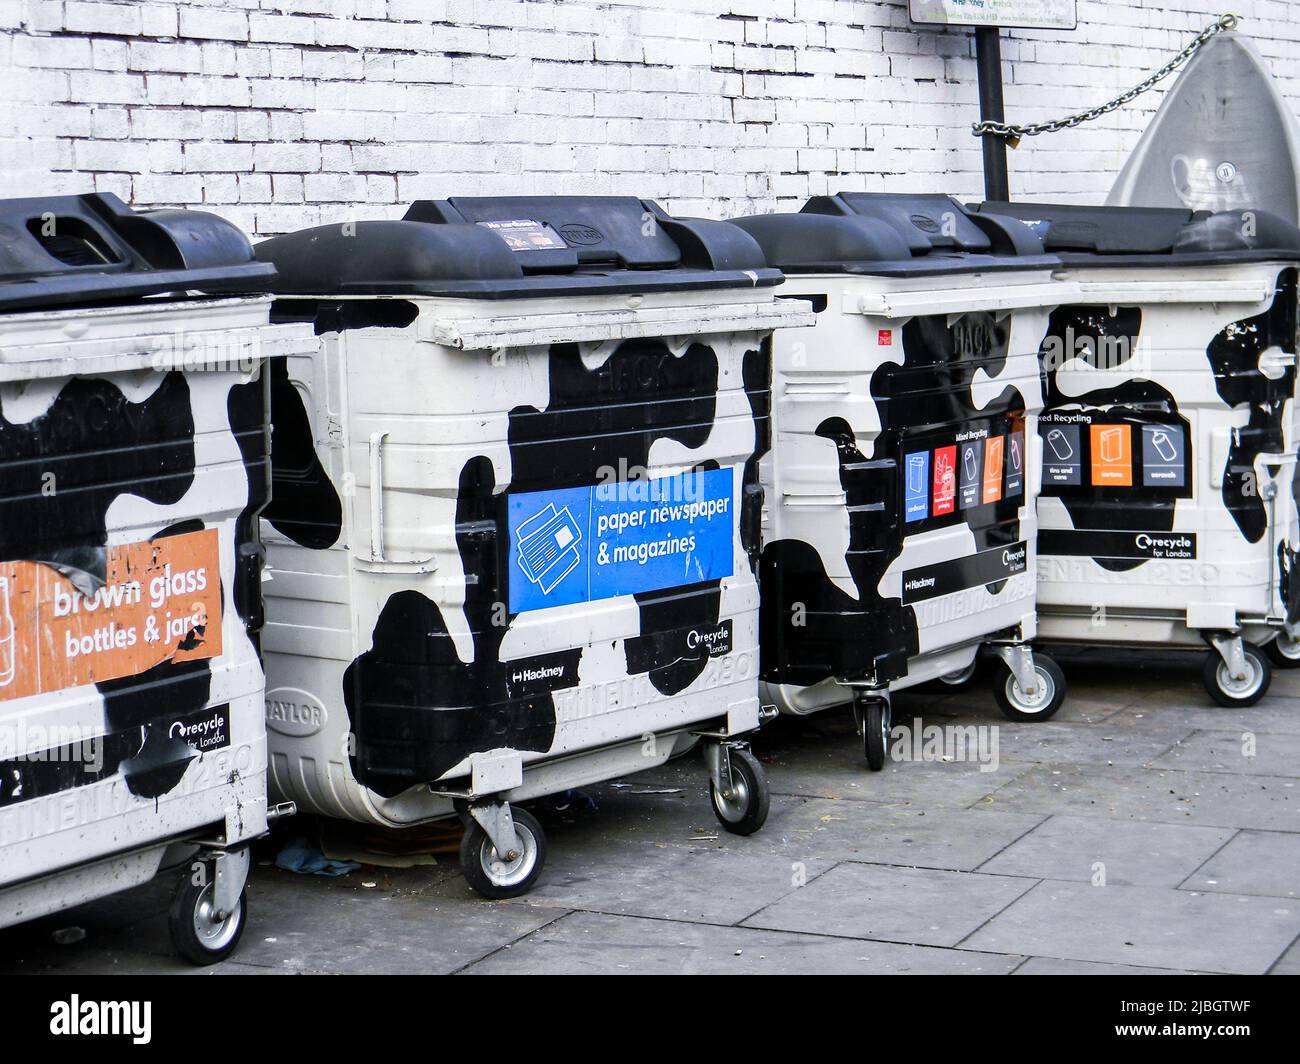 Dustbins with wheels & milk cow patterned design by Taylor on street. Bins colourfully labeled by London Recycles and separated by type of garbages Stock Photo